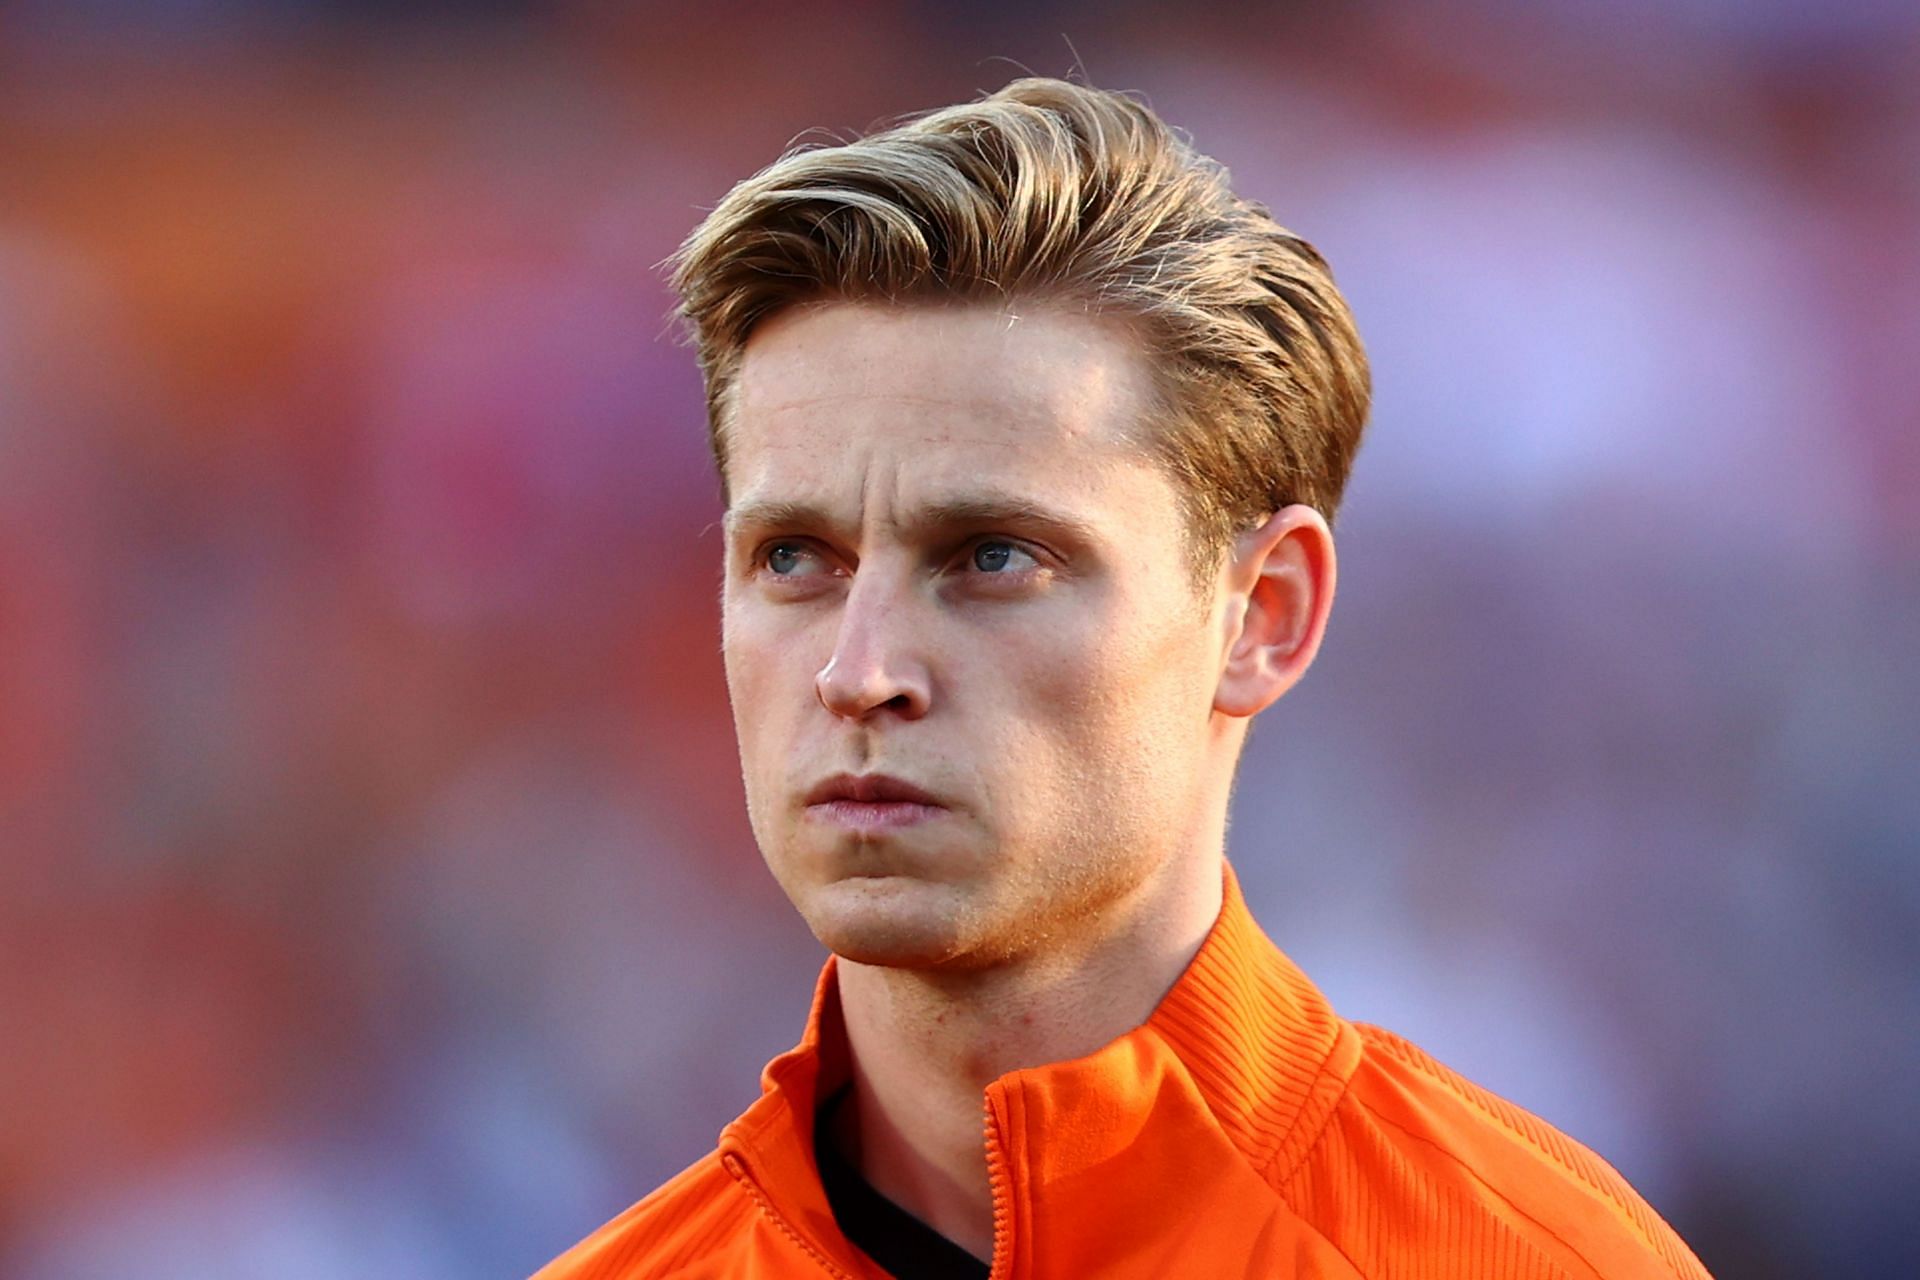 Frenkie de Jong&rsquo;s arrival at Old Trafford could hinge on Cristiano Ronaldo&rsquo;s future.